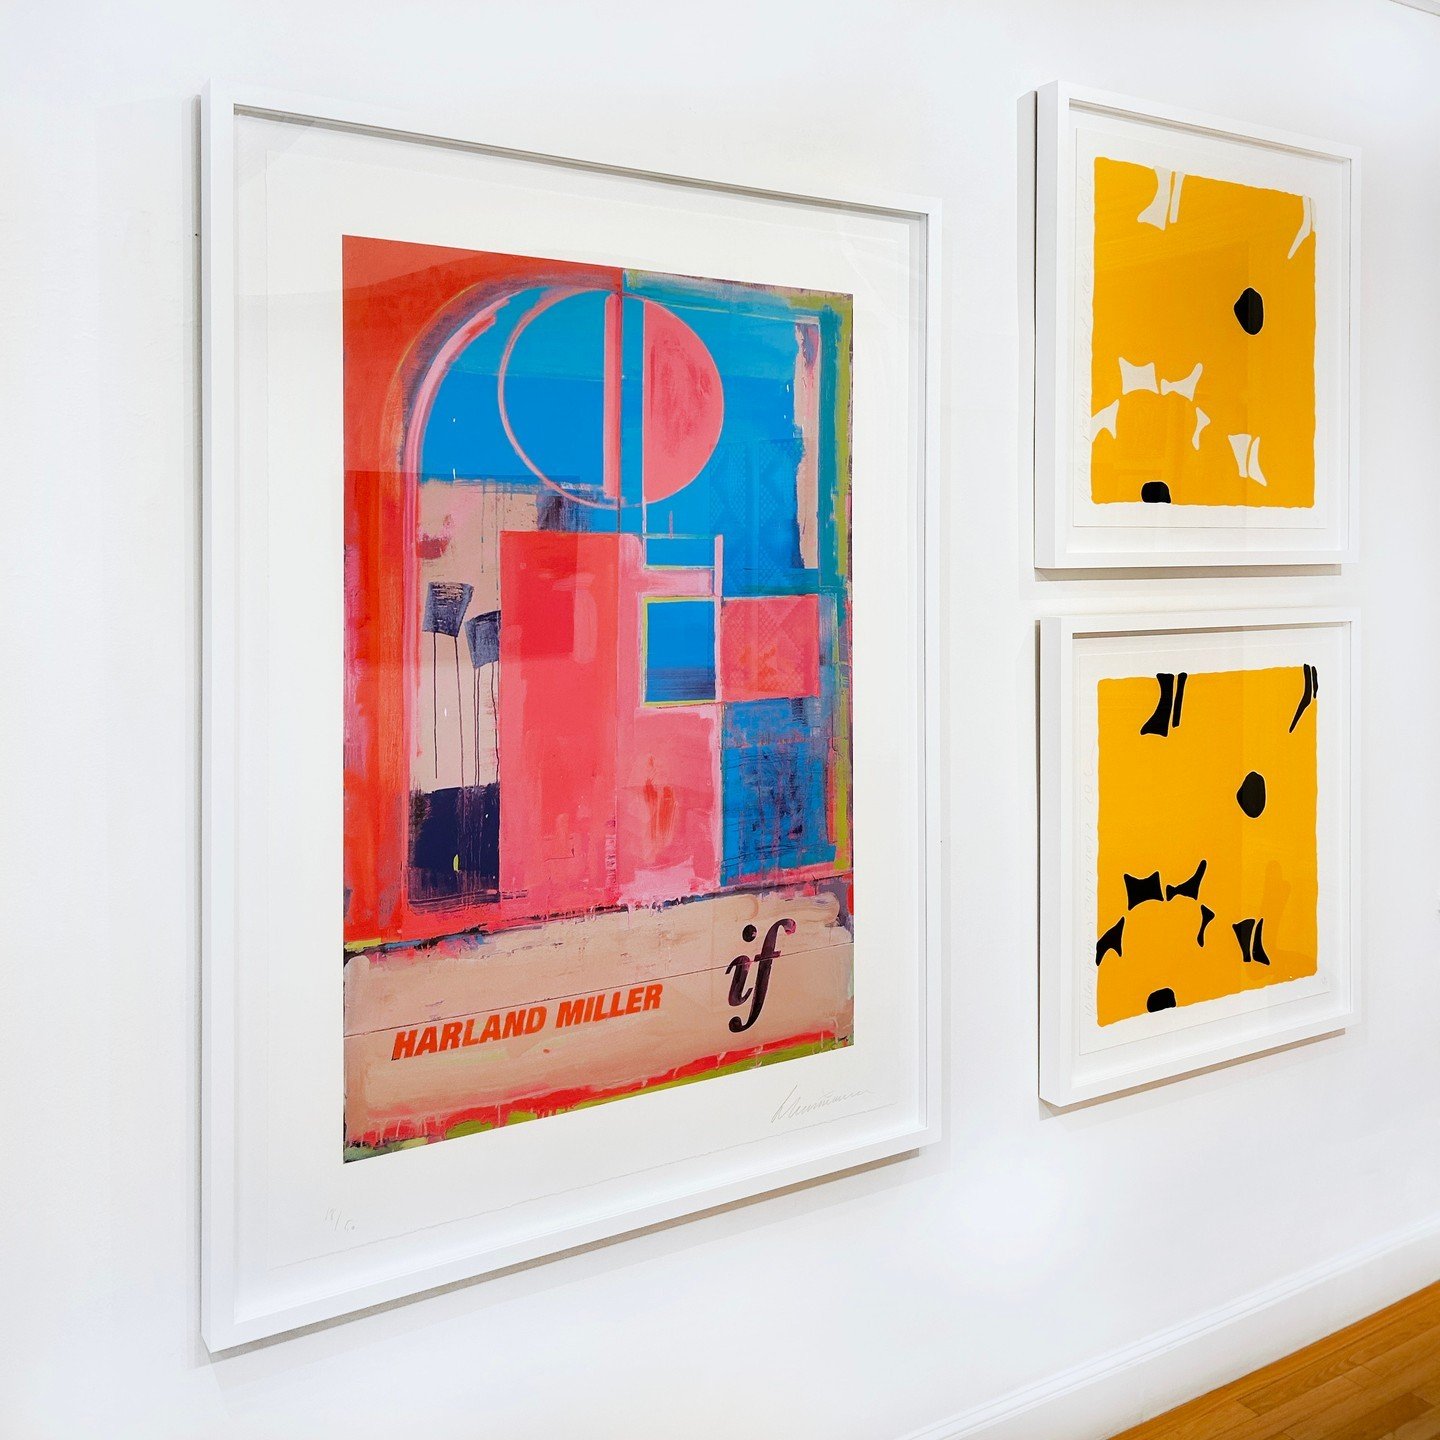 'IF' you love #HarlandMiller, stop by our #Boston gallery to see his works up-close 😉🤩

Link in bio and DM for inquiries.
.
.
.
#dtrmodern #artgallery #contemporaryart #contemporaryartist #popart #popartist #artoftheday #artdaily #artcollector #int